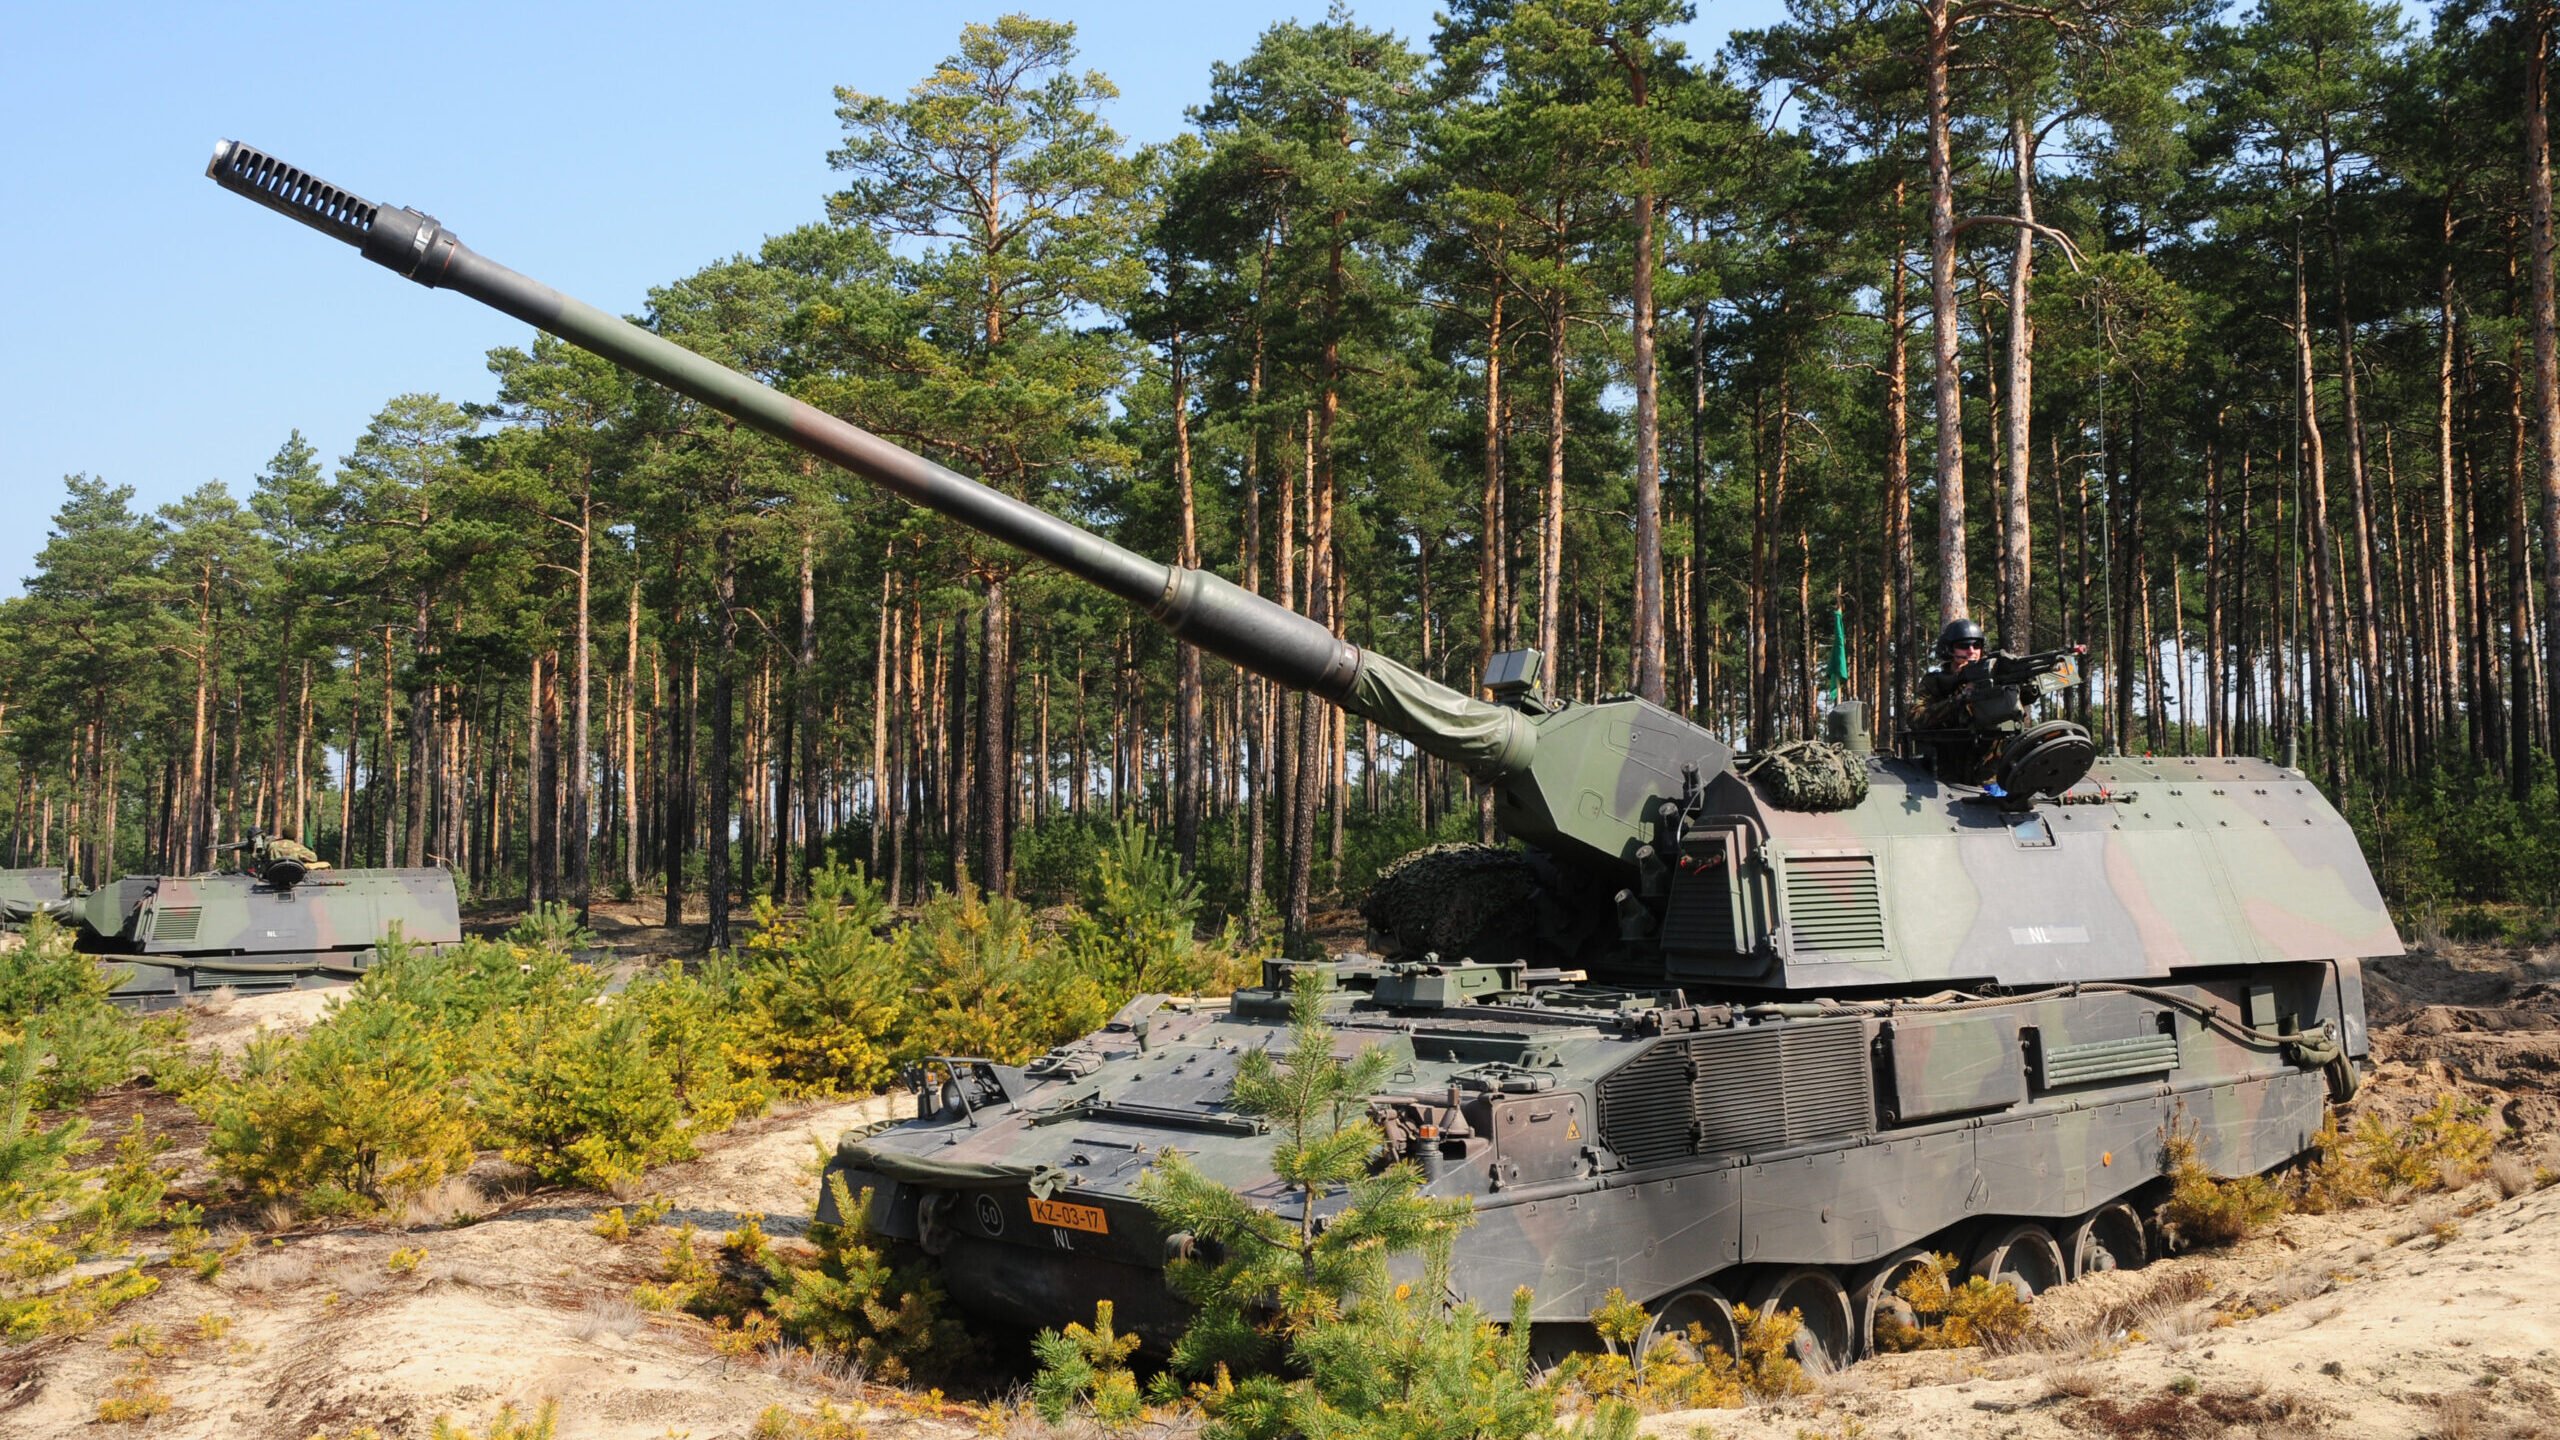 Germany signs $201M contract for 10 PzH2000 howitzers to replenish stocks sent to Ukraine